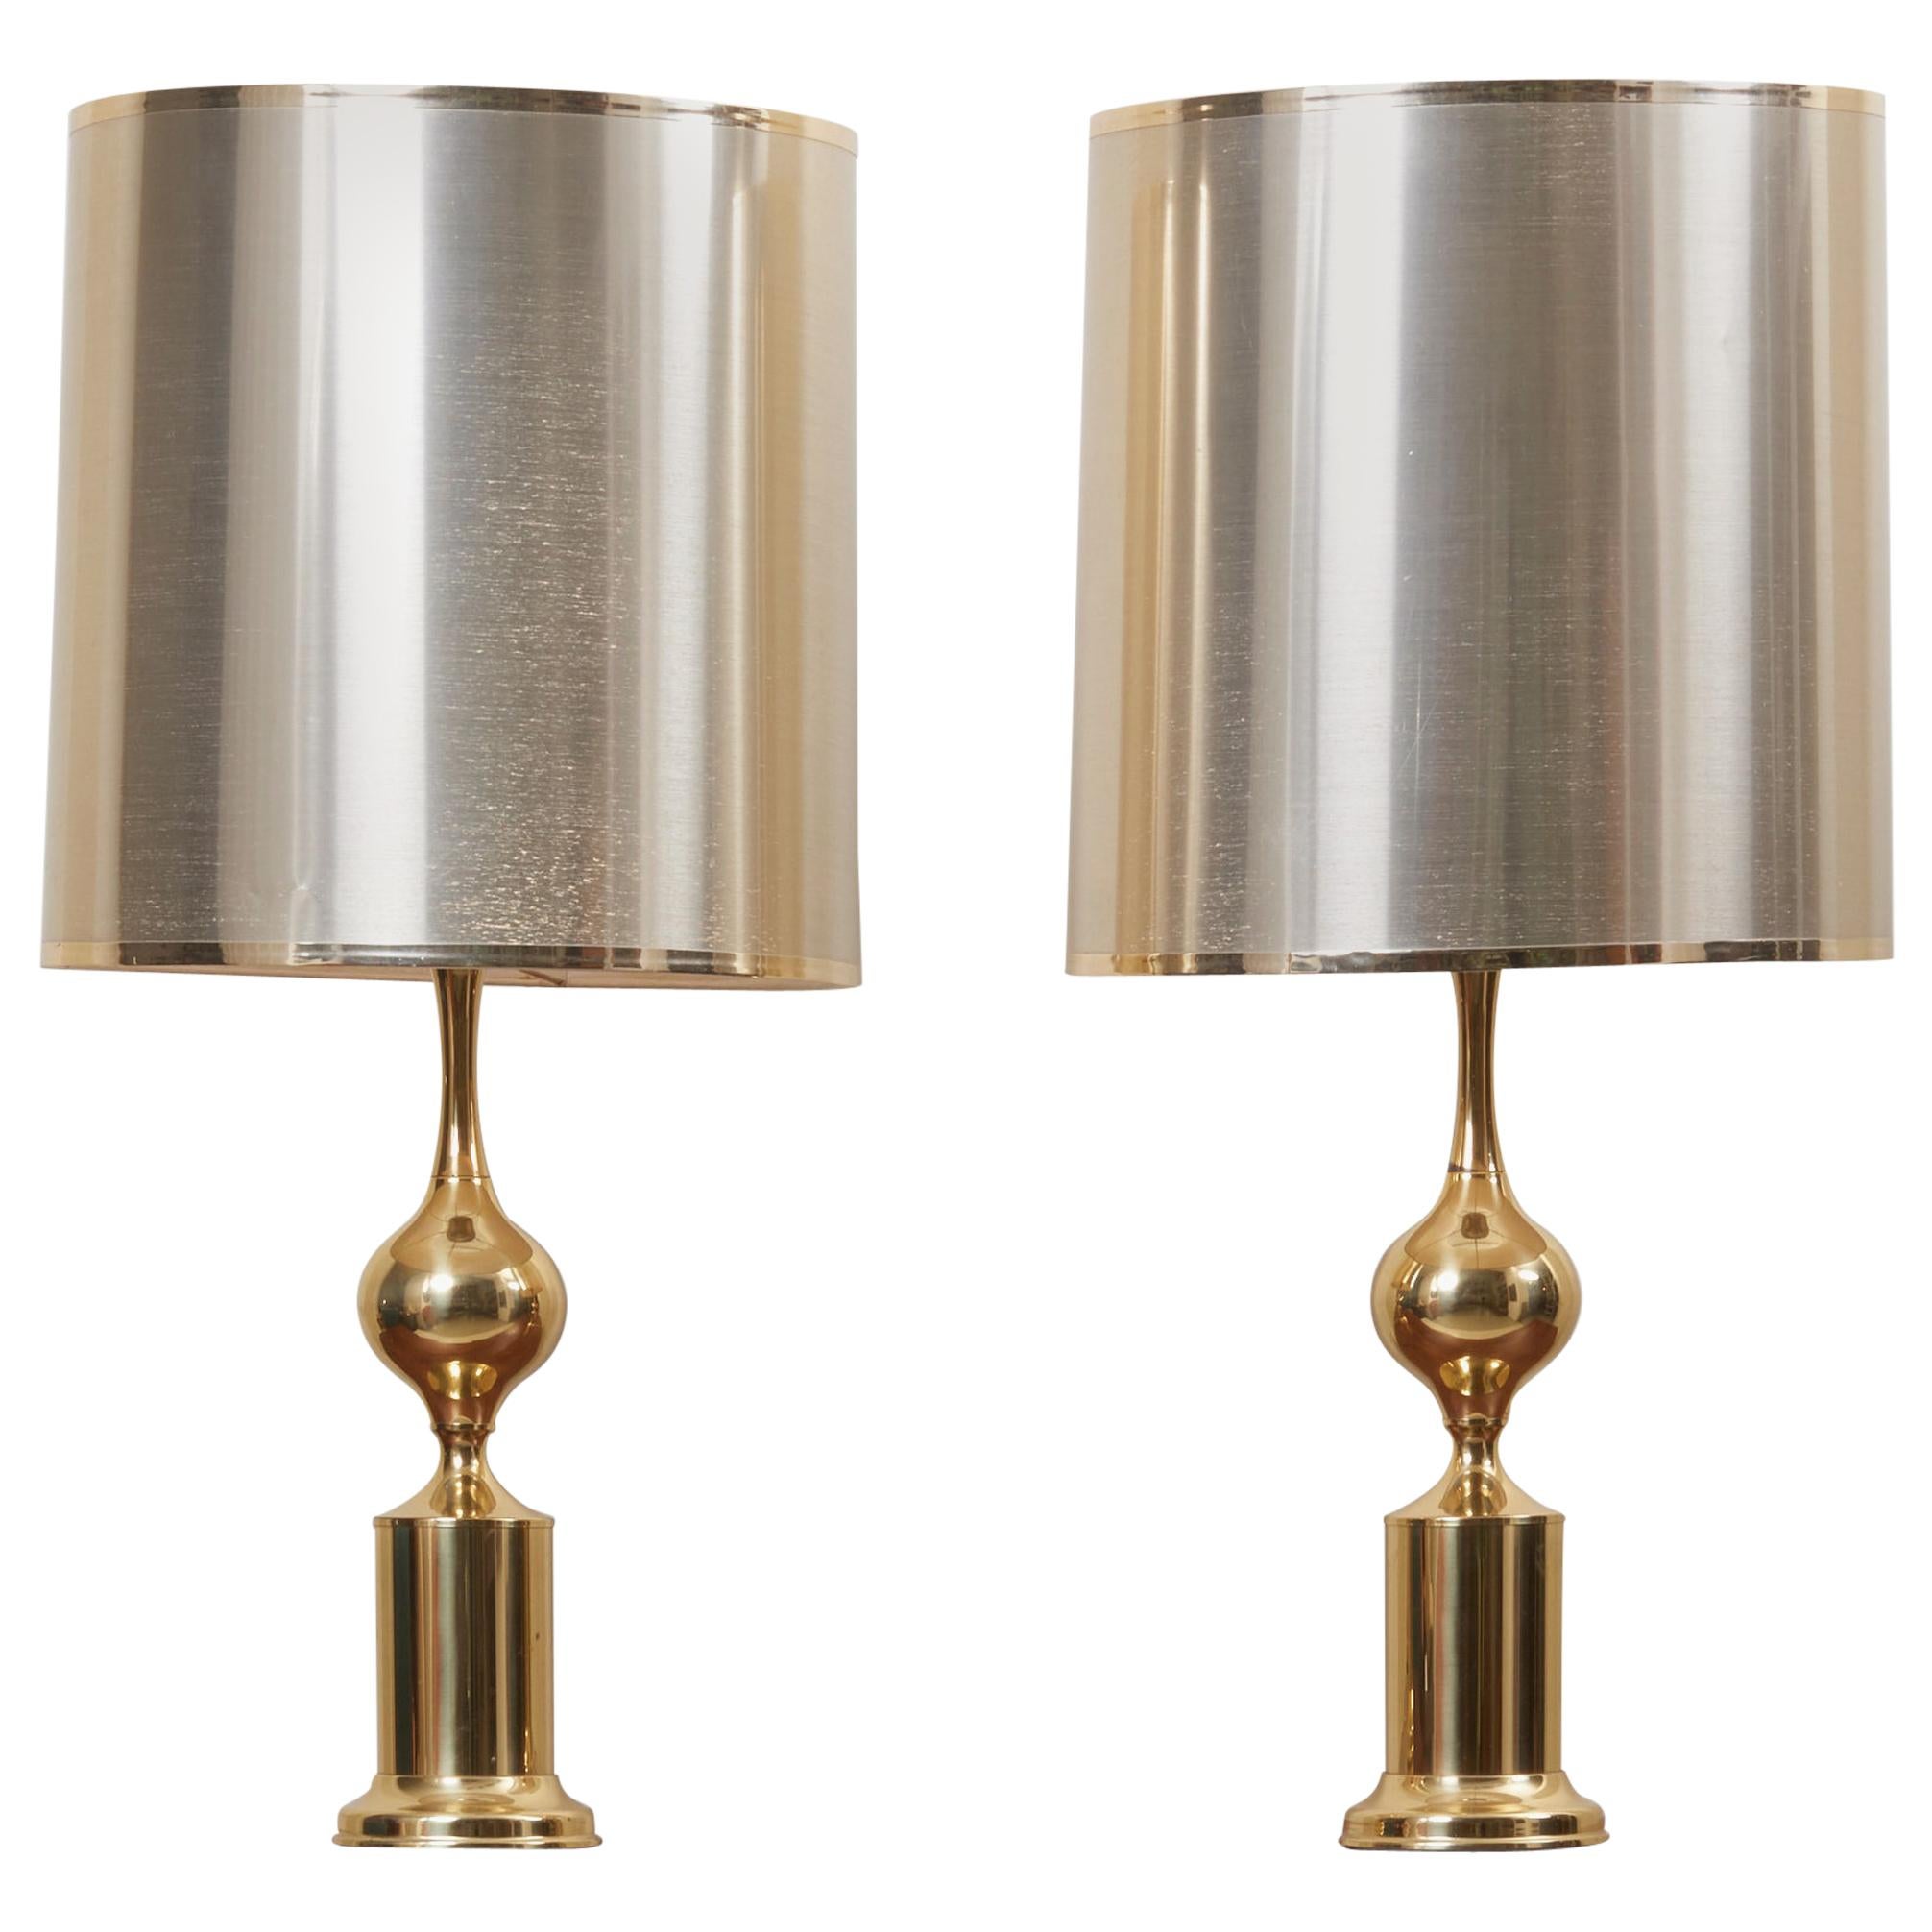 Huge Pair of Hollywood Regency Design Table Lamps in Brass with Metallic Shade